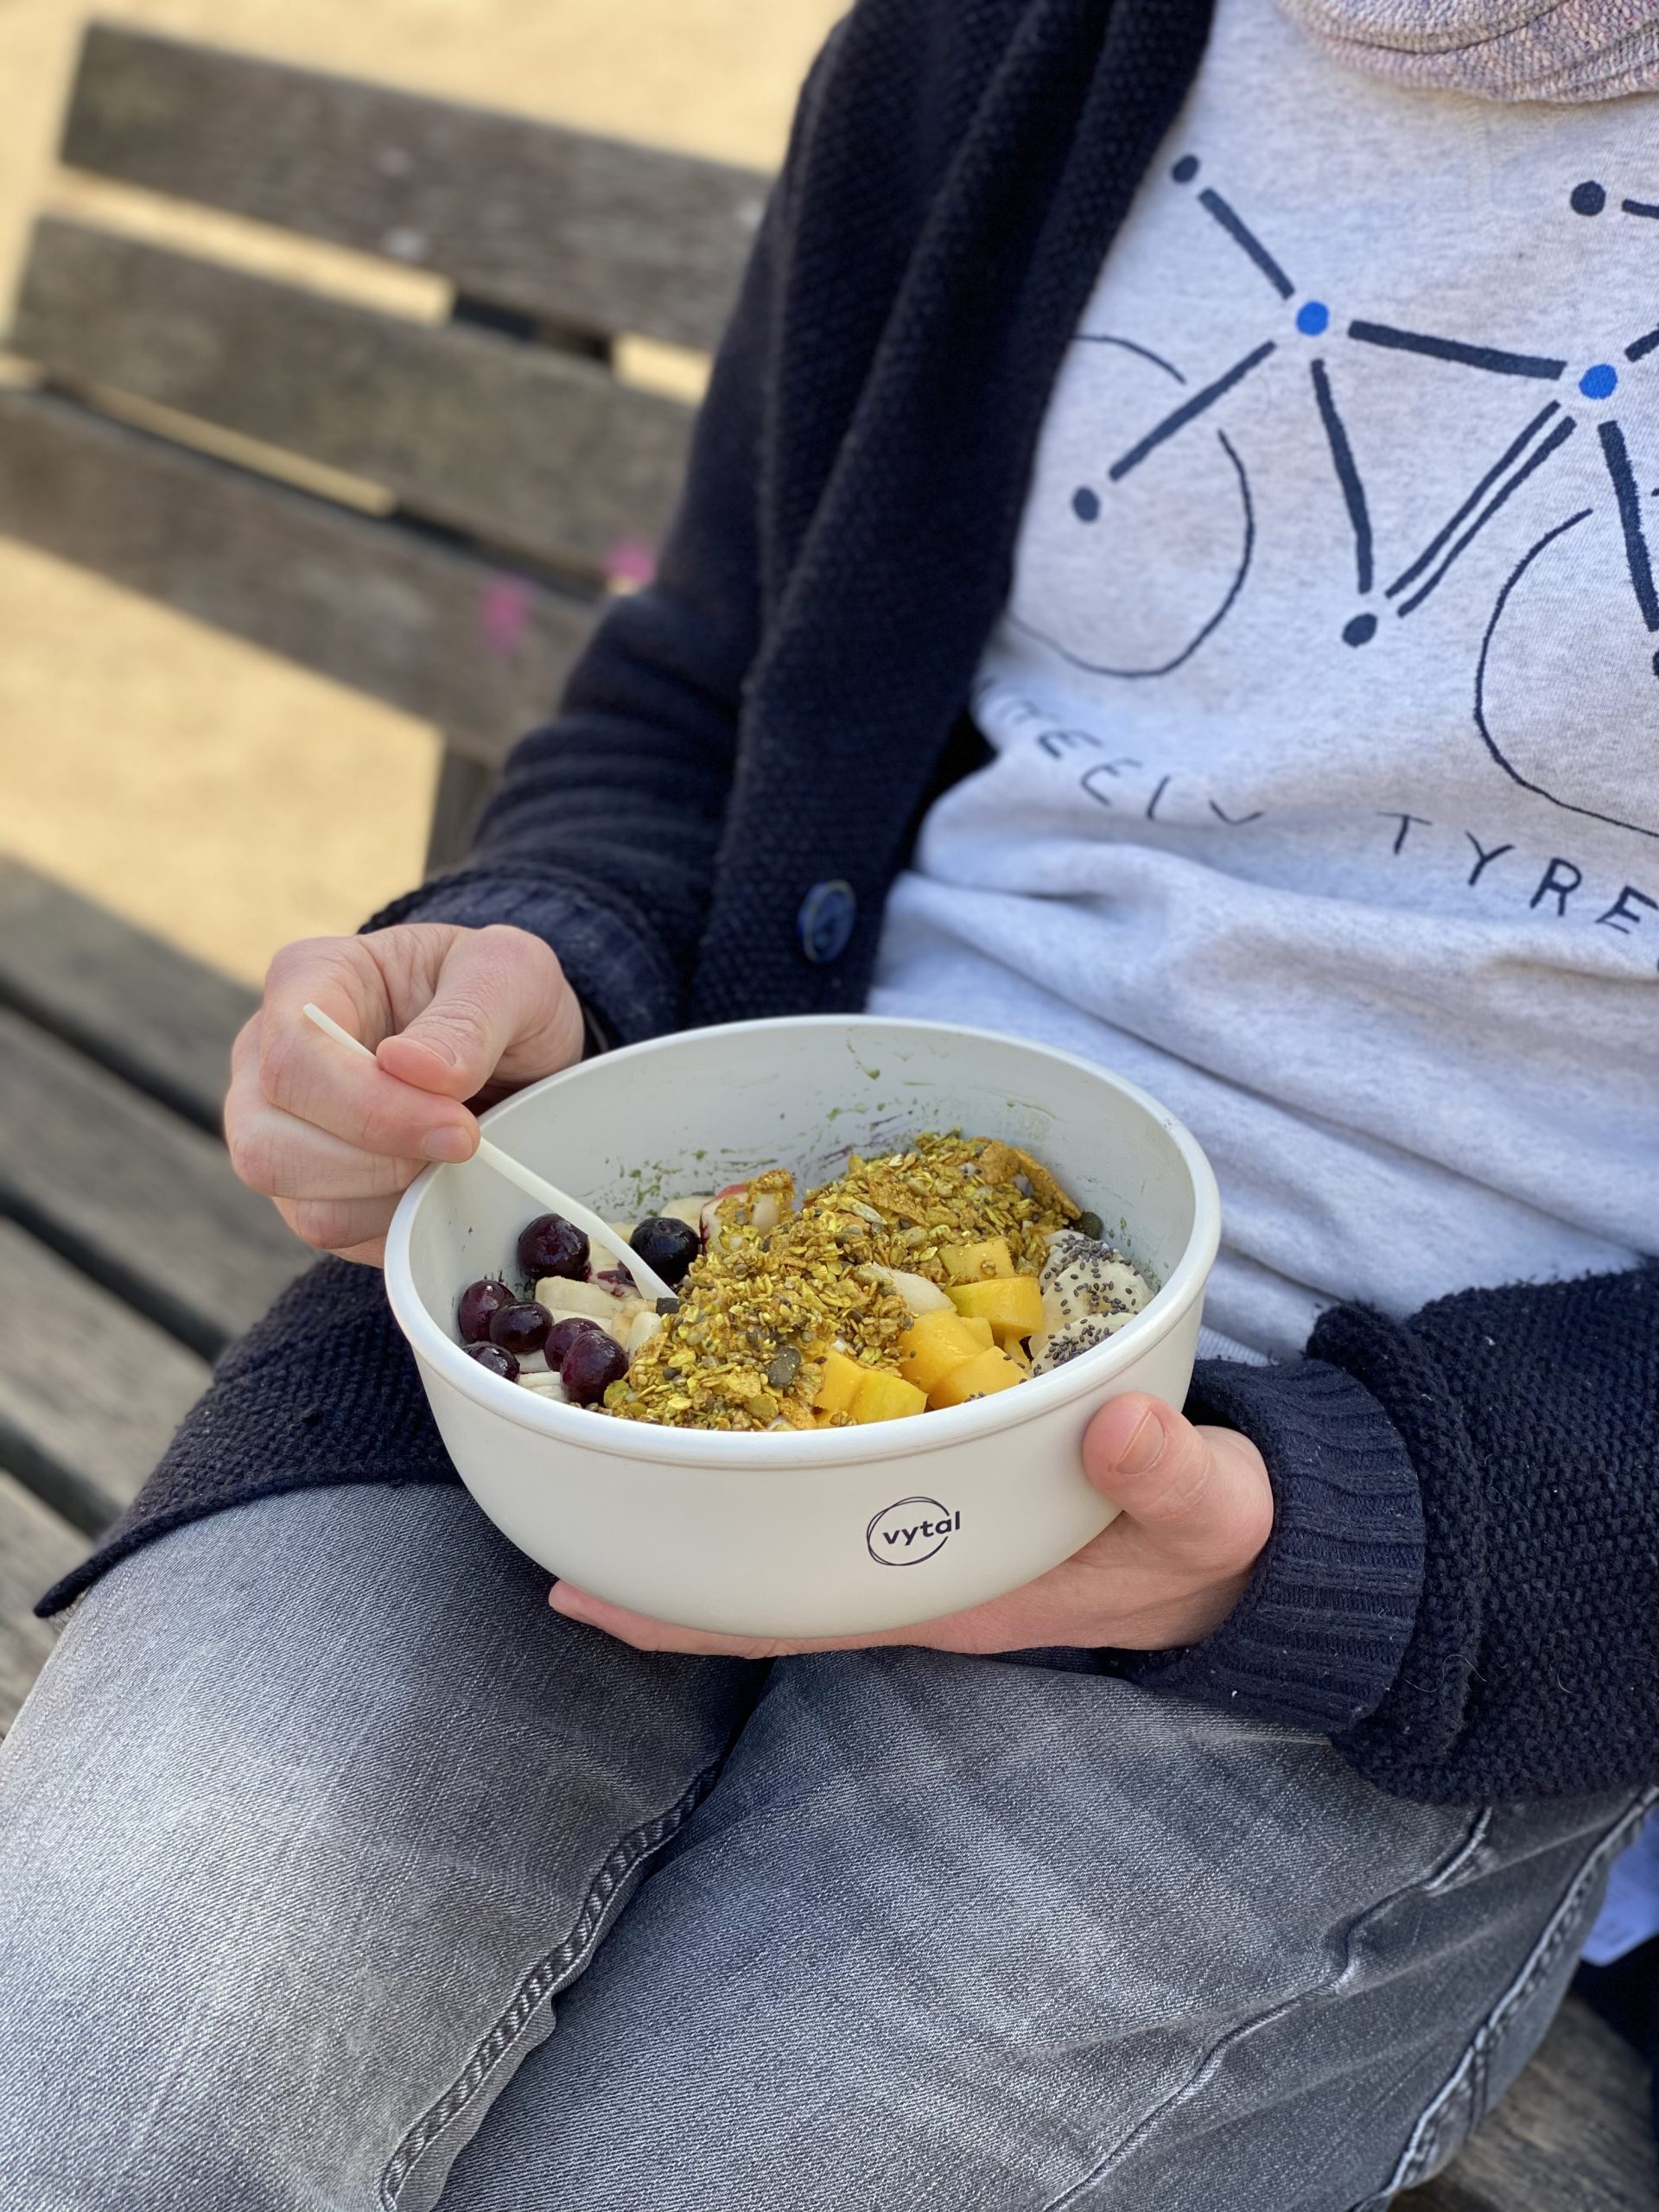 Close up of a VYTAL bowl with cereal and fruit in it that is being held by a person.